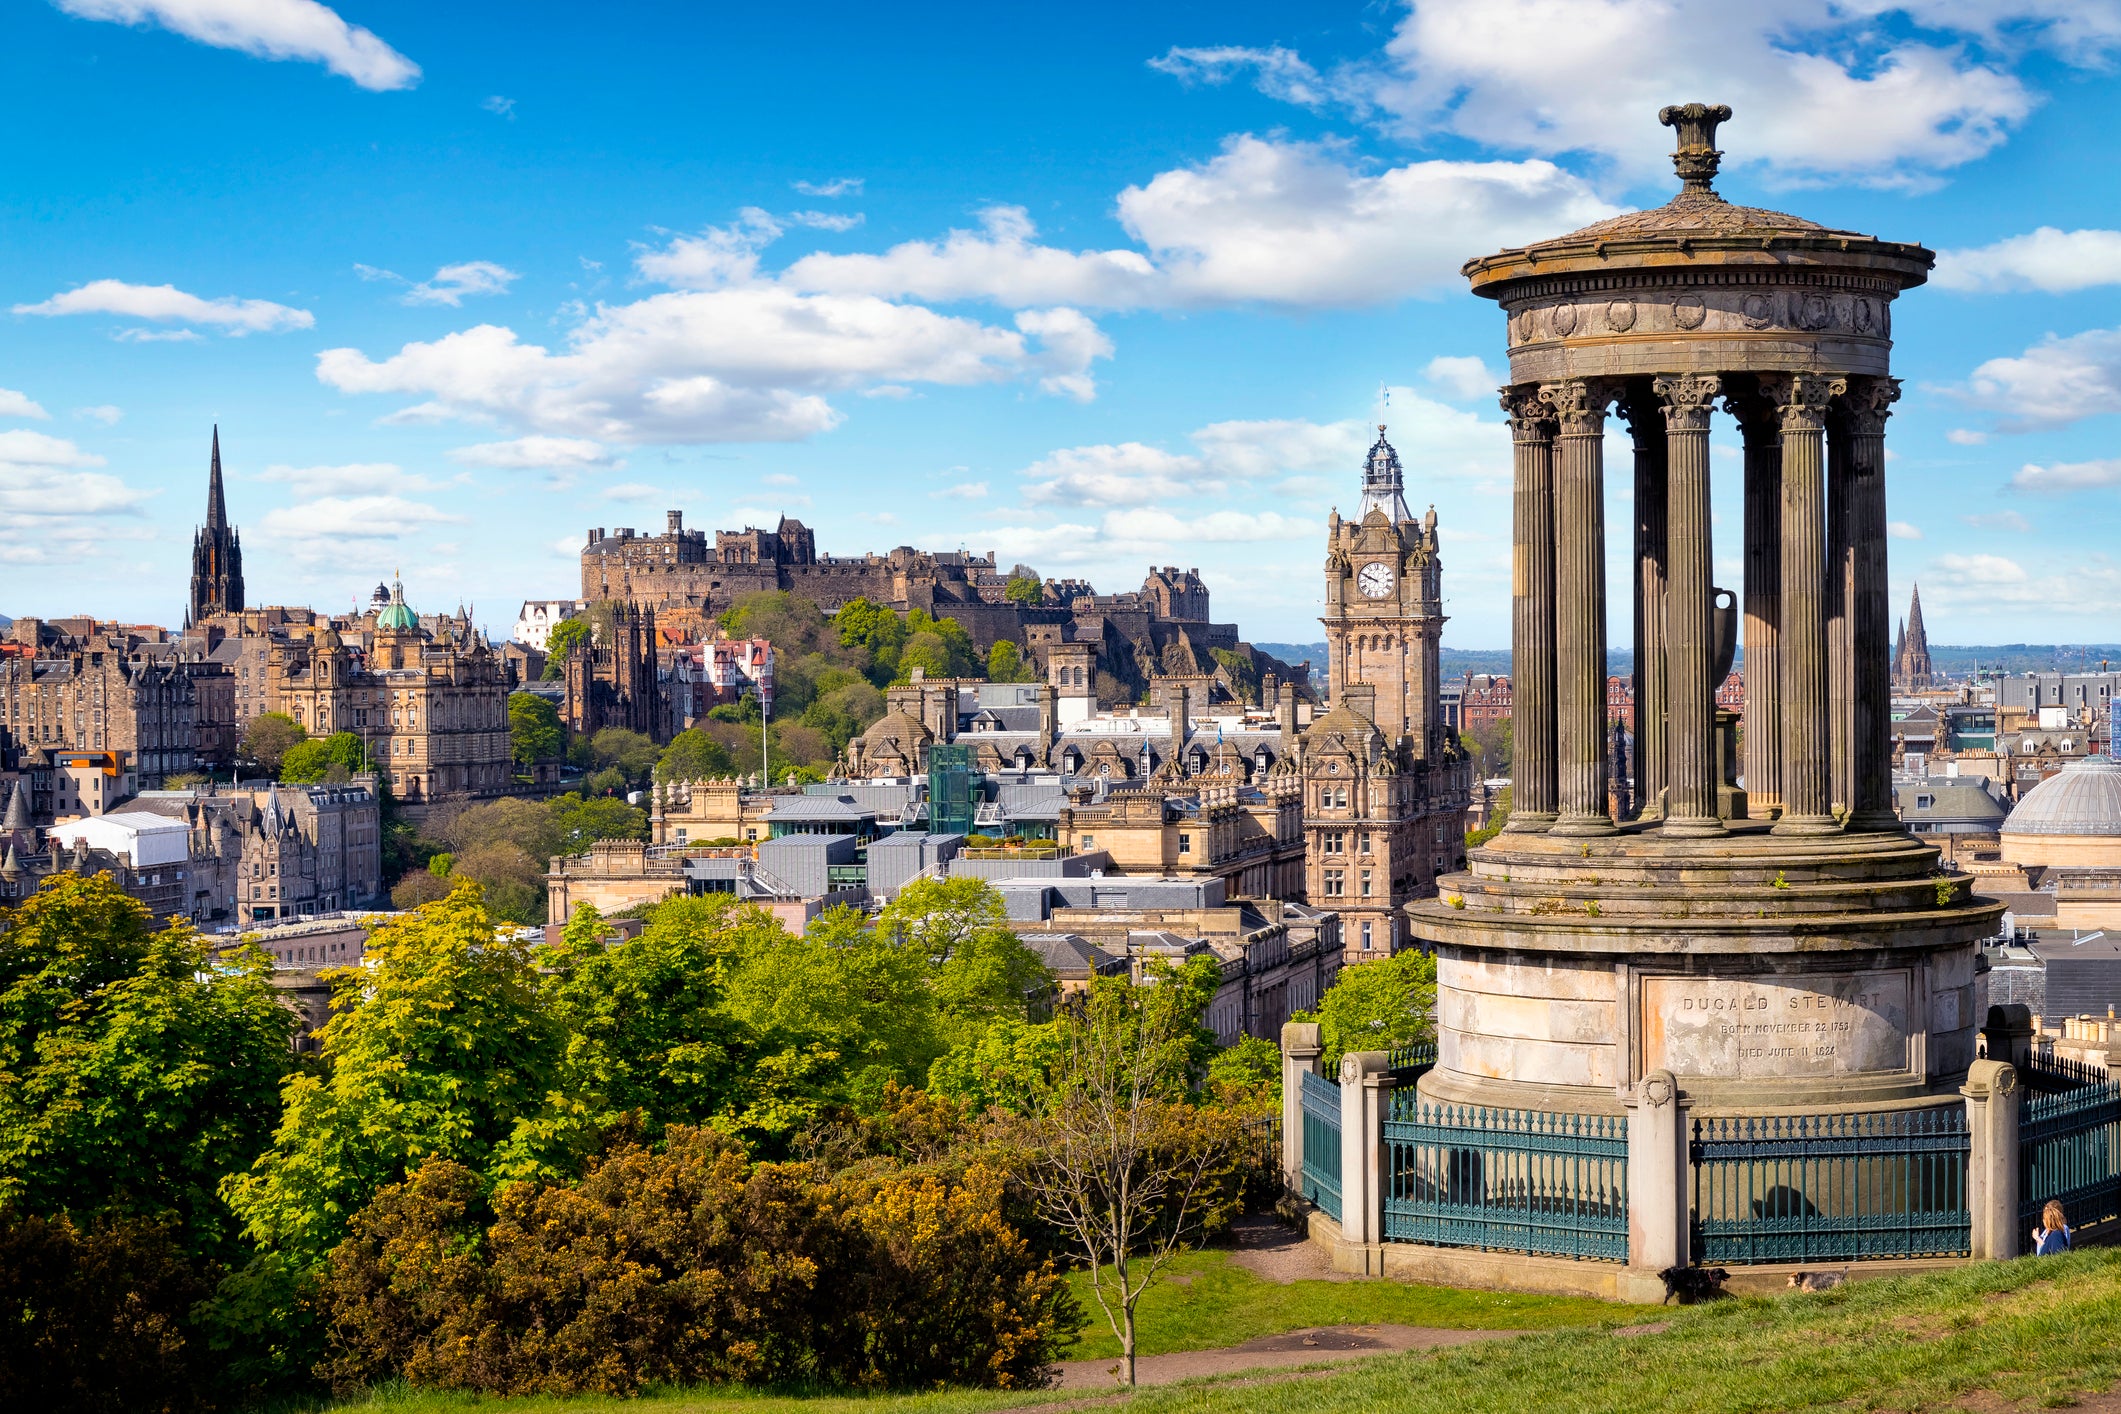 The Dugald Stewart monument and the view over Edinburgh from Calton Hill